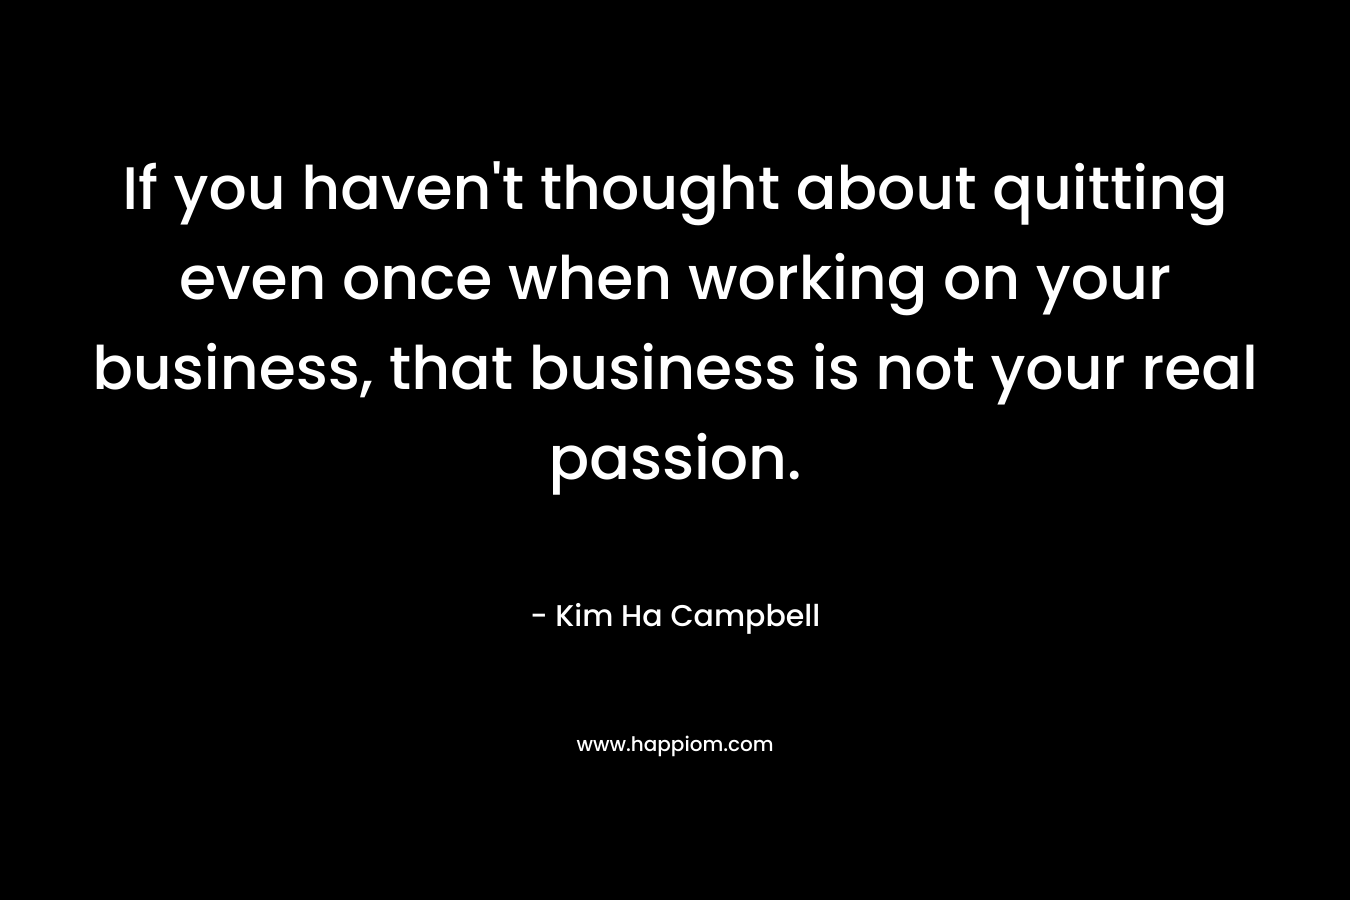 If you haven’t thought about quitting even once when working on your business, that business is not your real passion. – Kim Ha Campbell